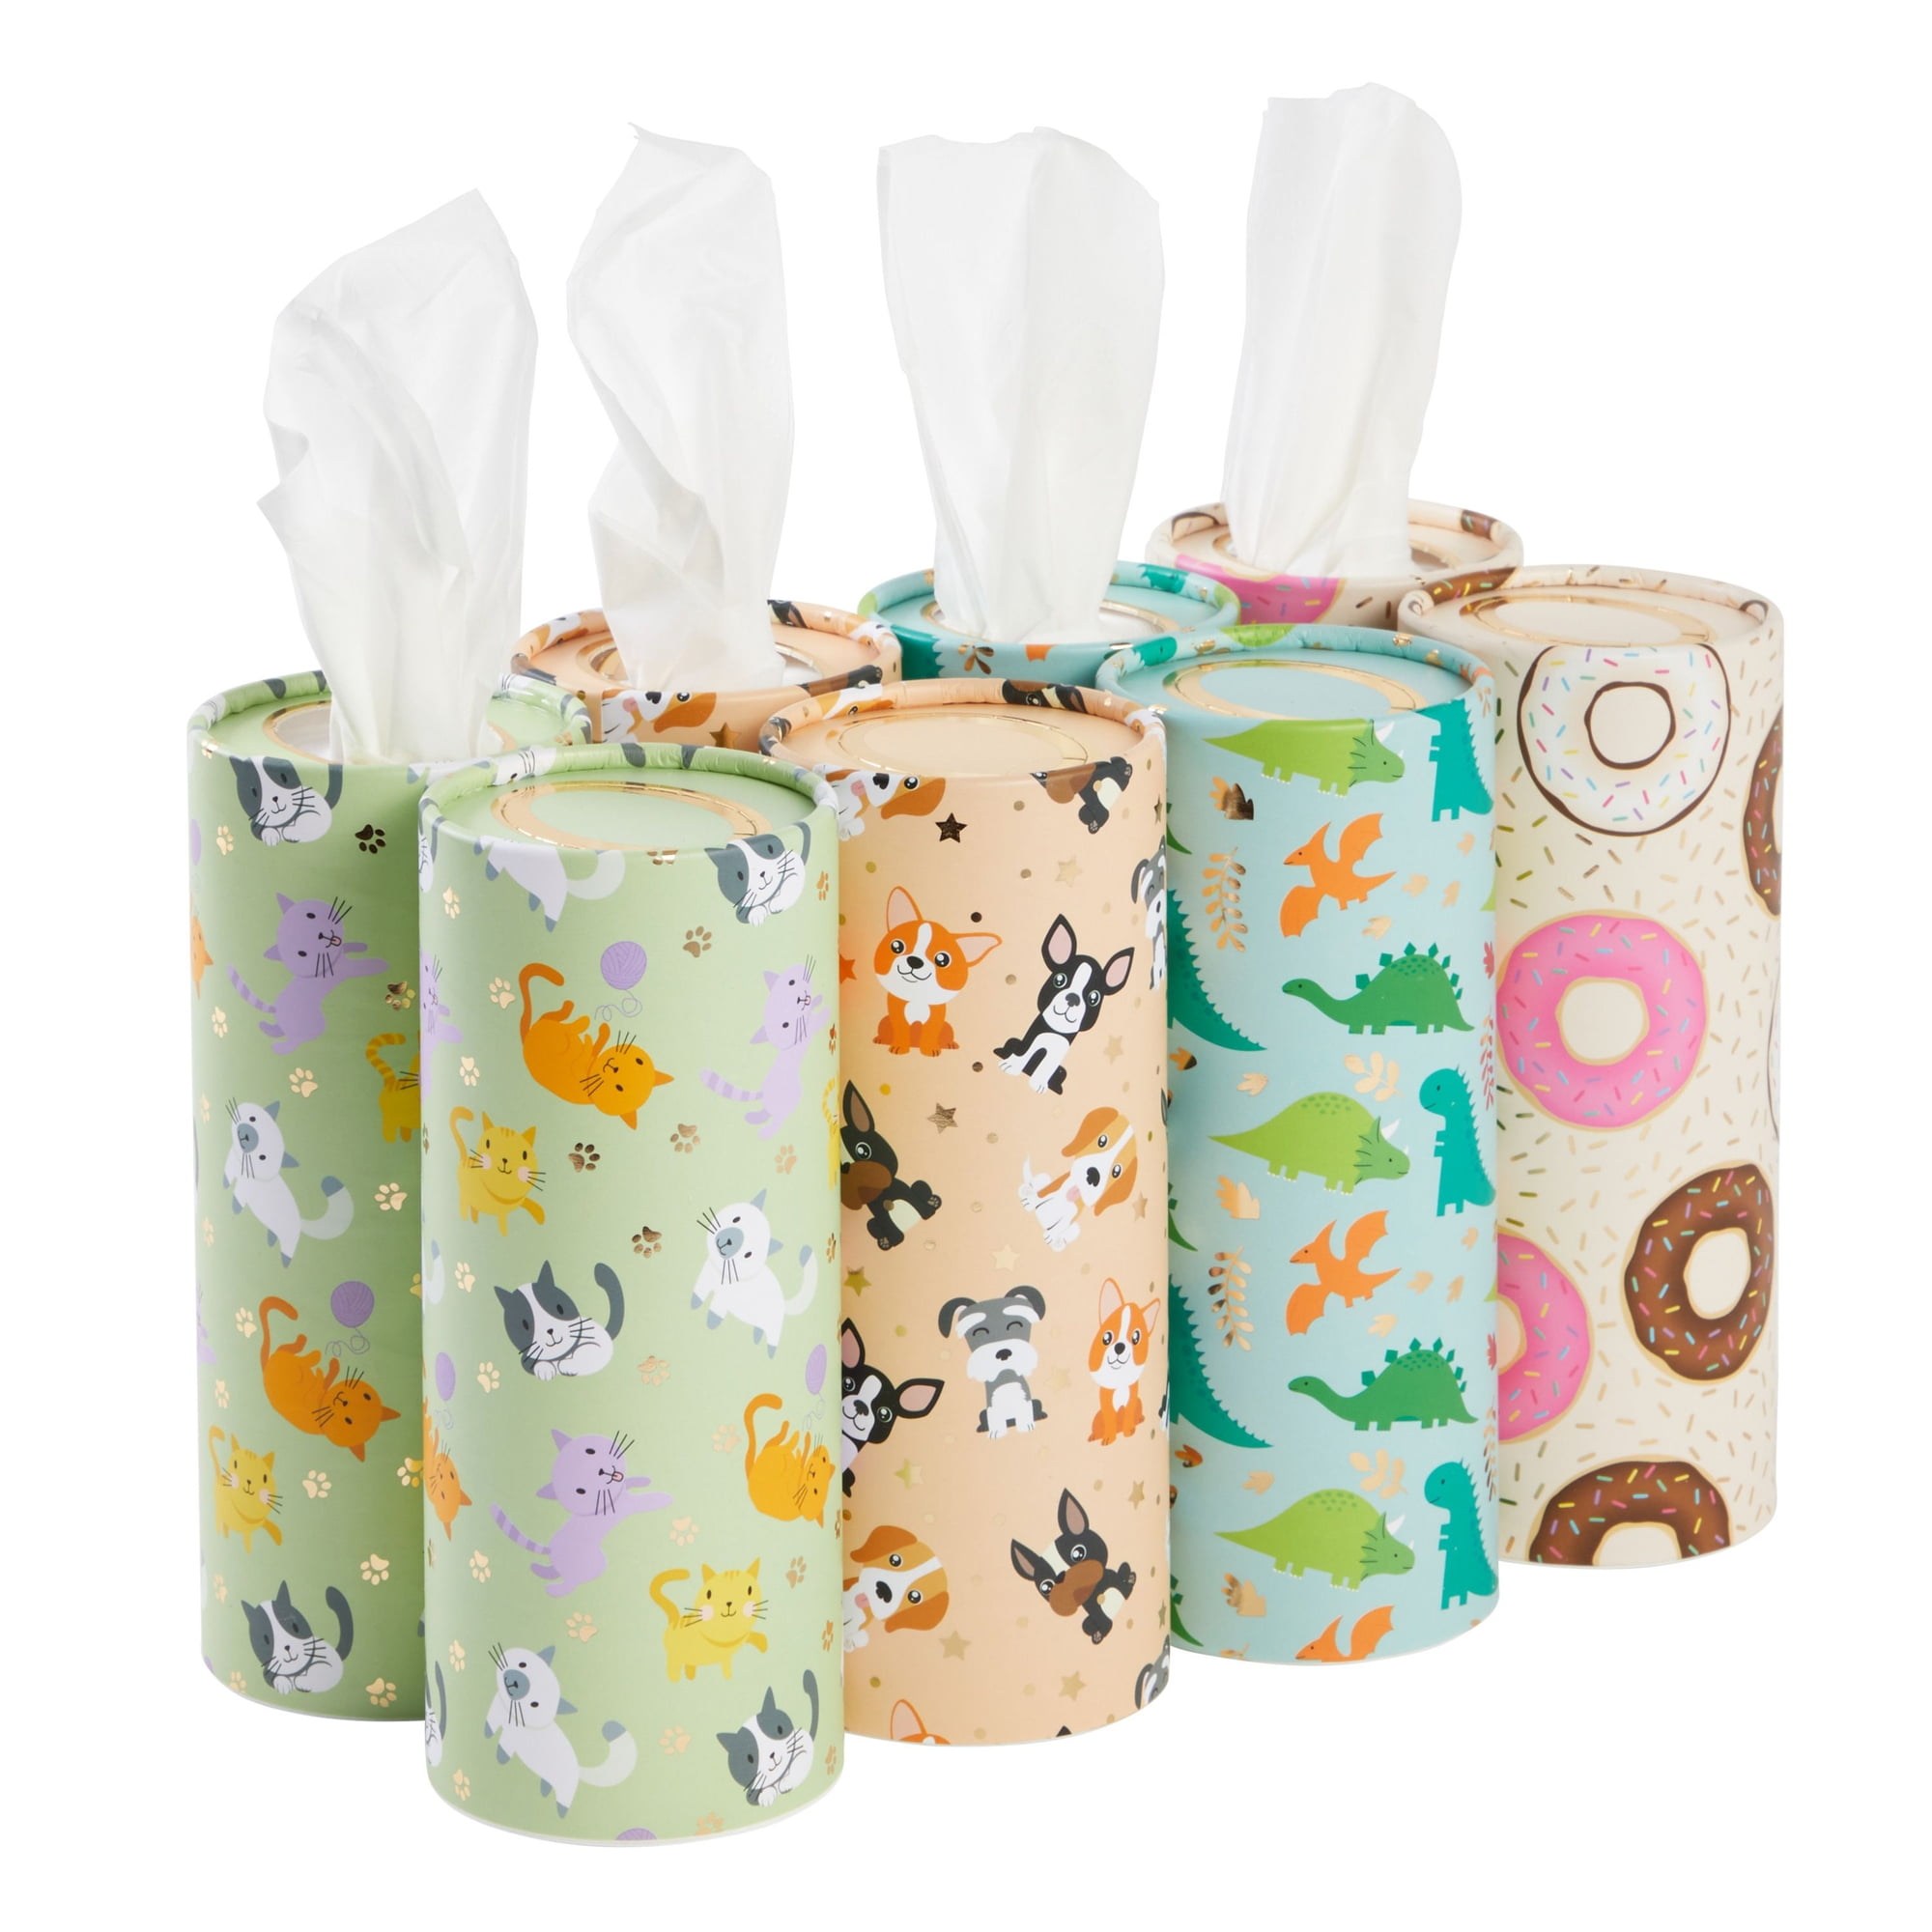 4 Pcs Car Tissues Boxes Travel Cylinder Tissue Boxes 7 x 2.6 Inch Large  Capacity Car Tissues Cylinder Holder Hawaiian Style Round Tissue Box for  Car